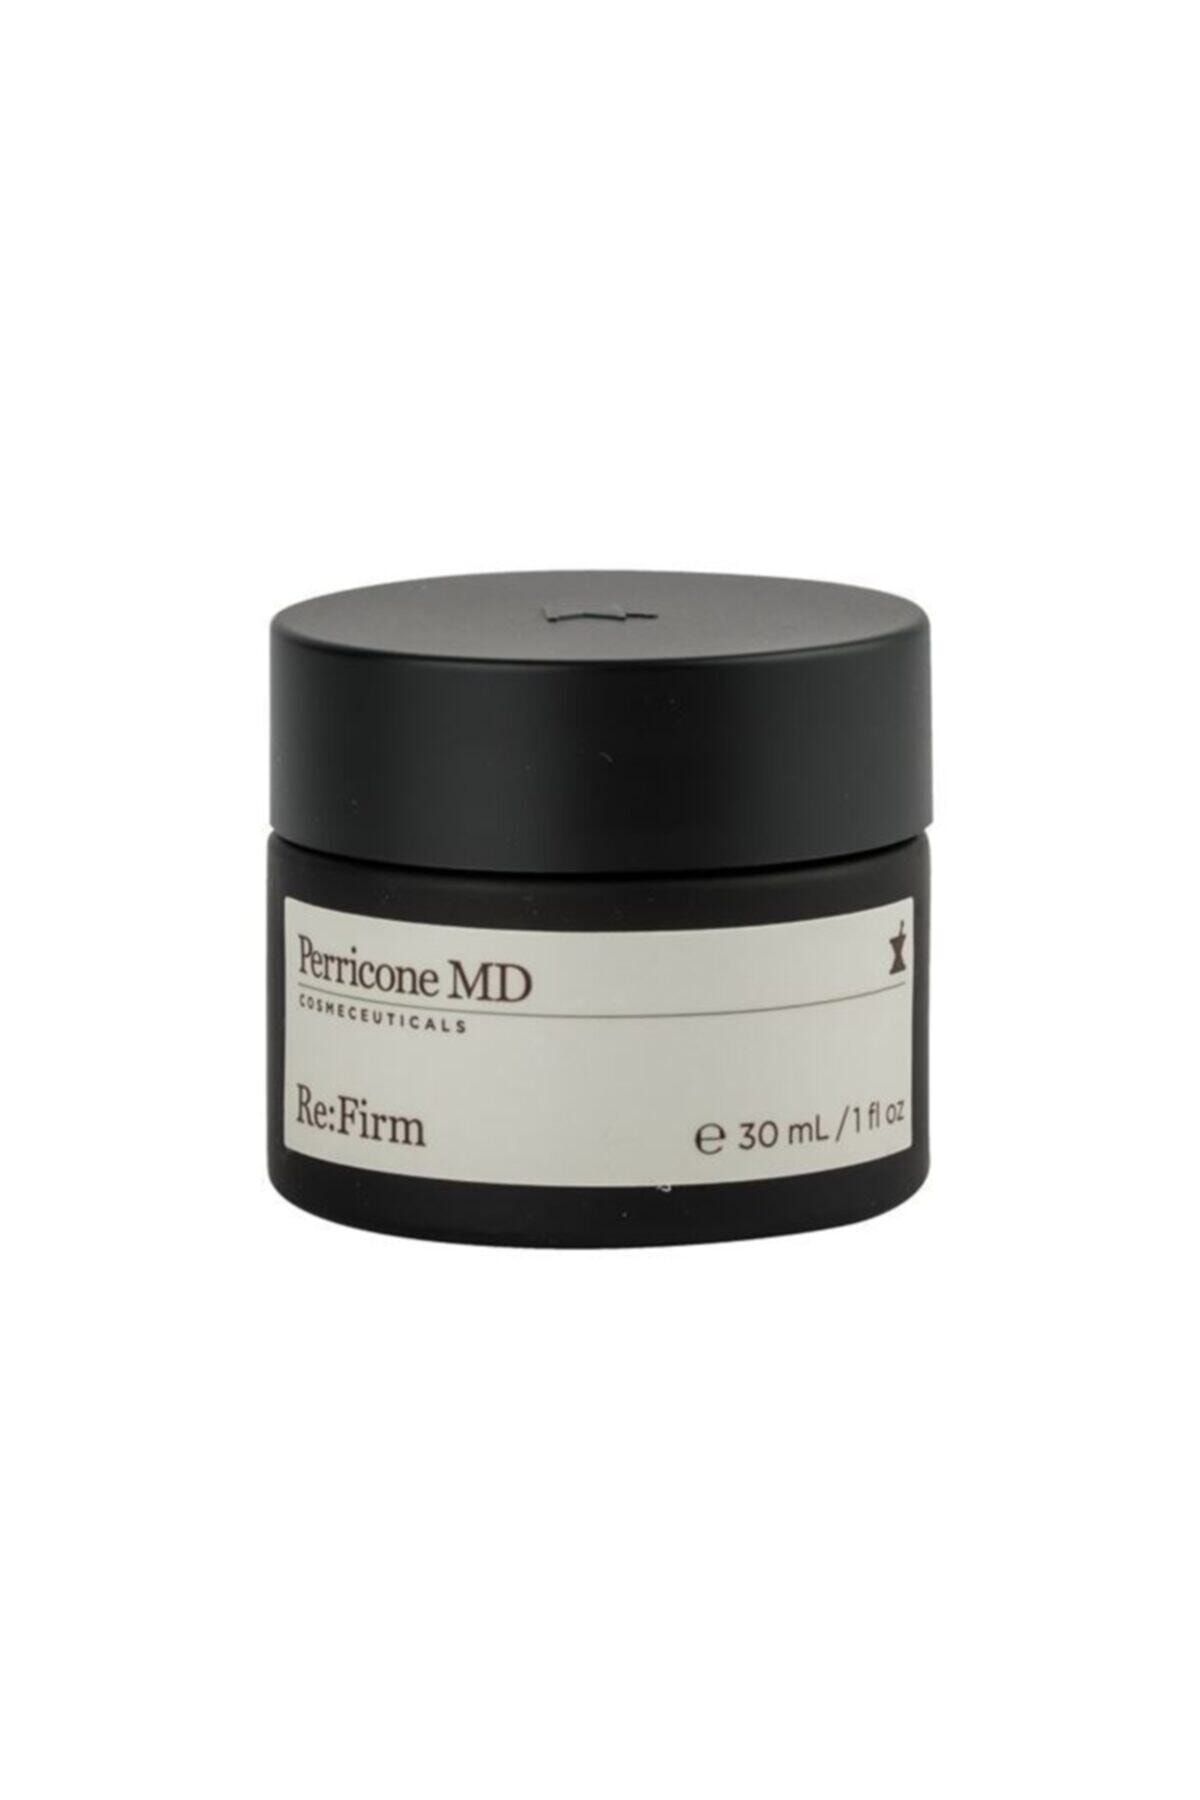 PERRICONE Re Firm 30ml